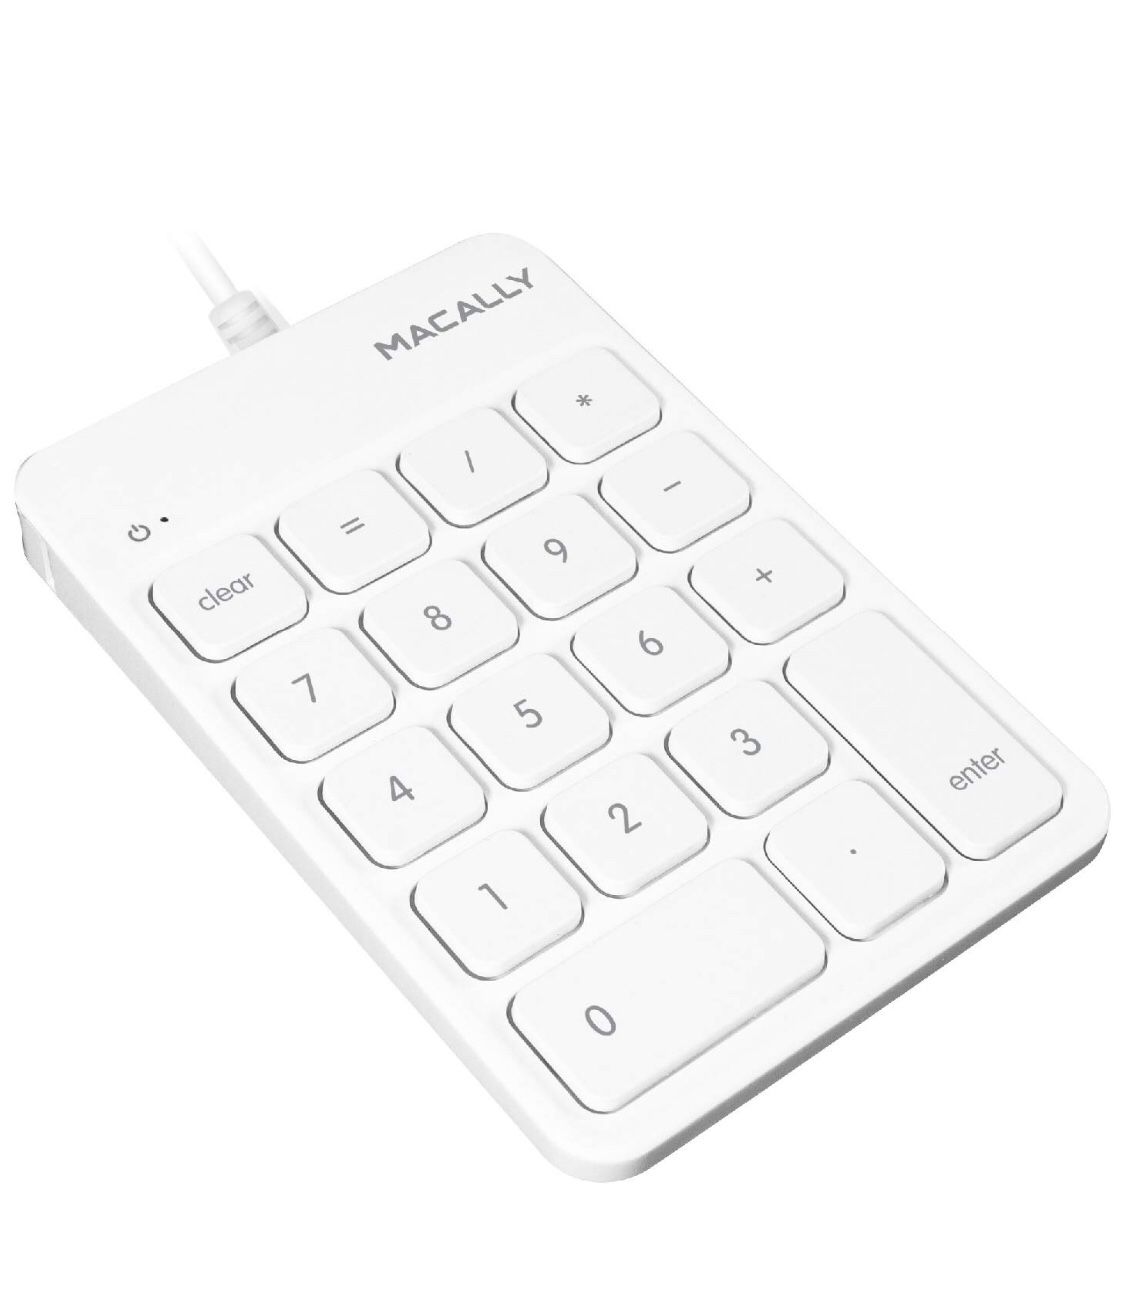 Macally Wired USB Numeric Keypad Keyboard for Laptop, Apple Mac iMac MacBook Pro/Air, Windows PC, or Desktop Computer with 5 Foot Cable & 18 Key Slim